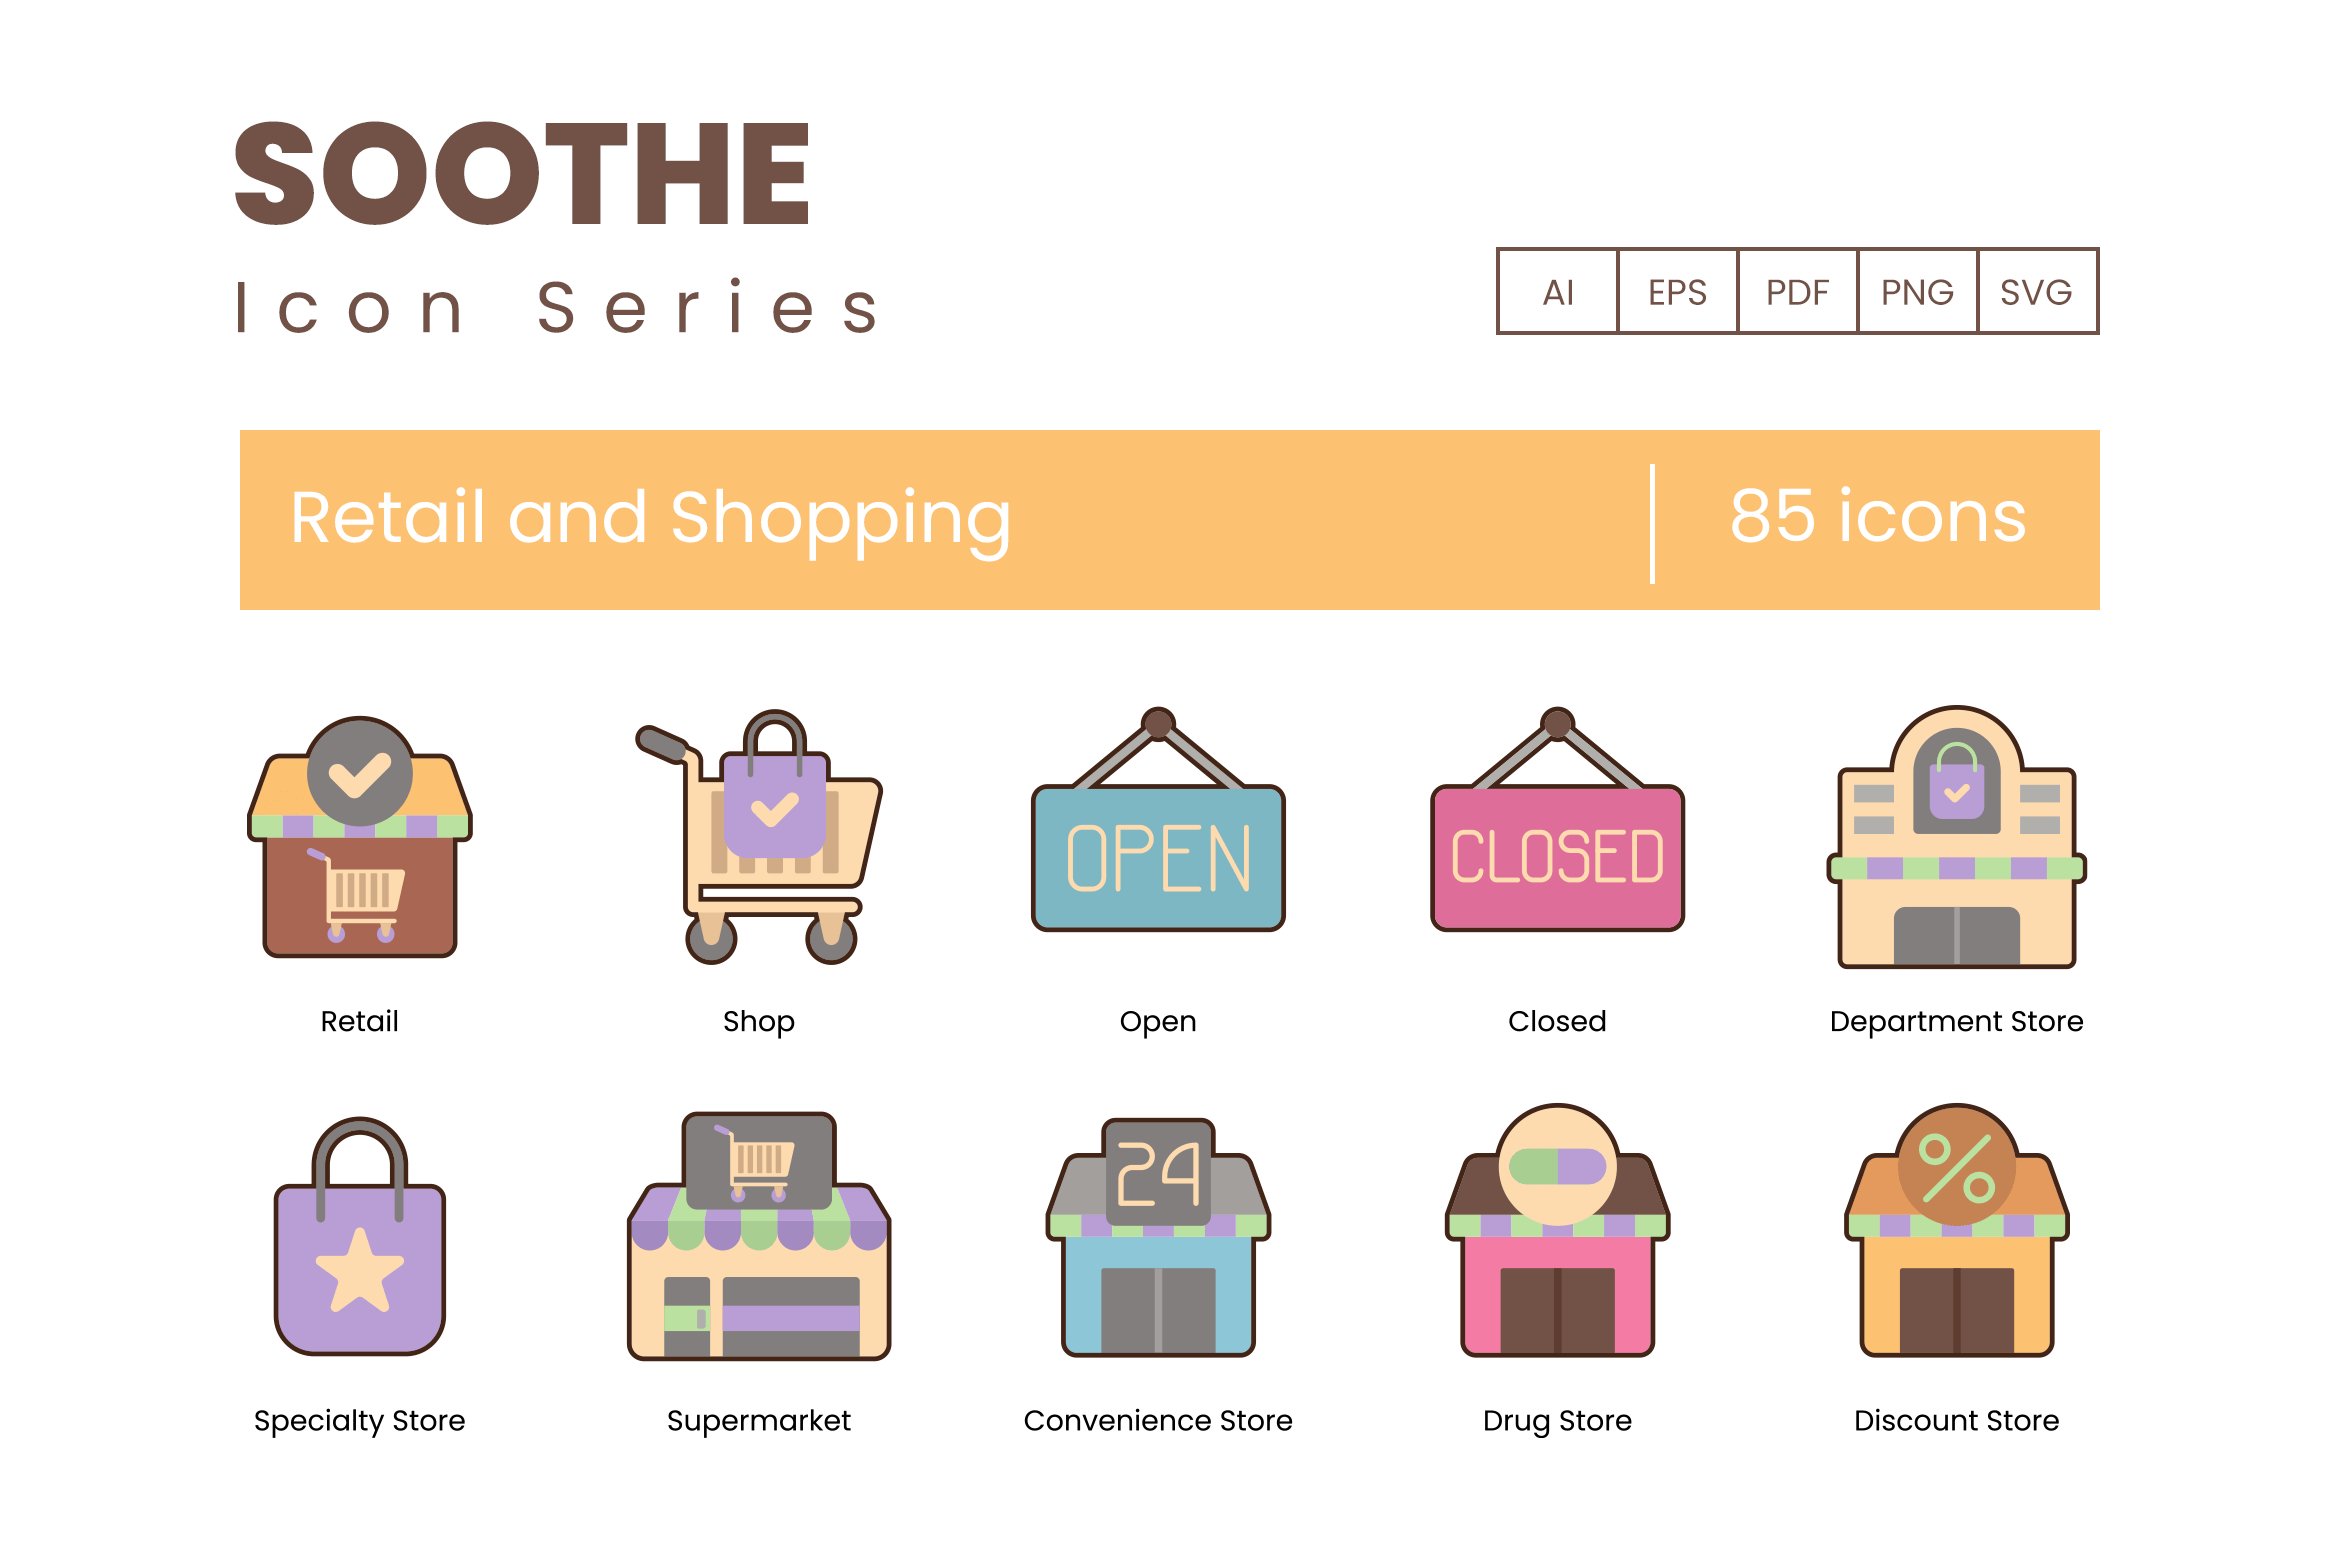 85 Retail & Shopping Icons - Soothe cover image.